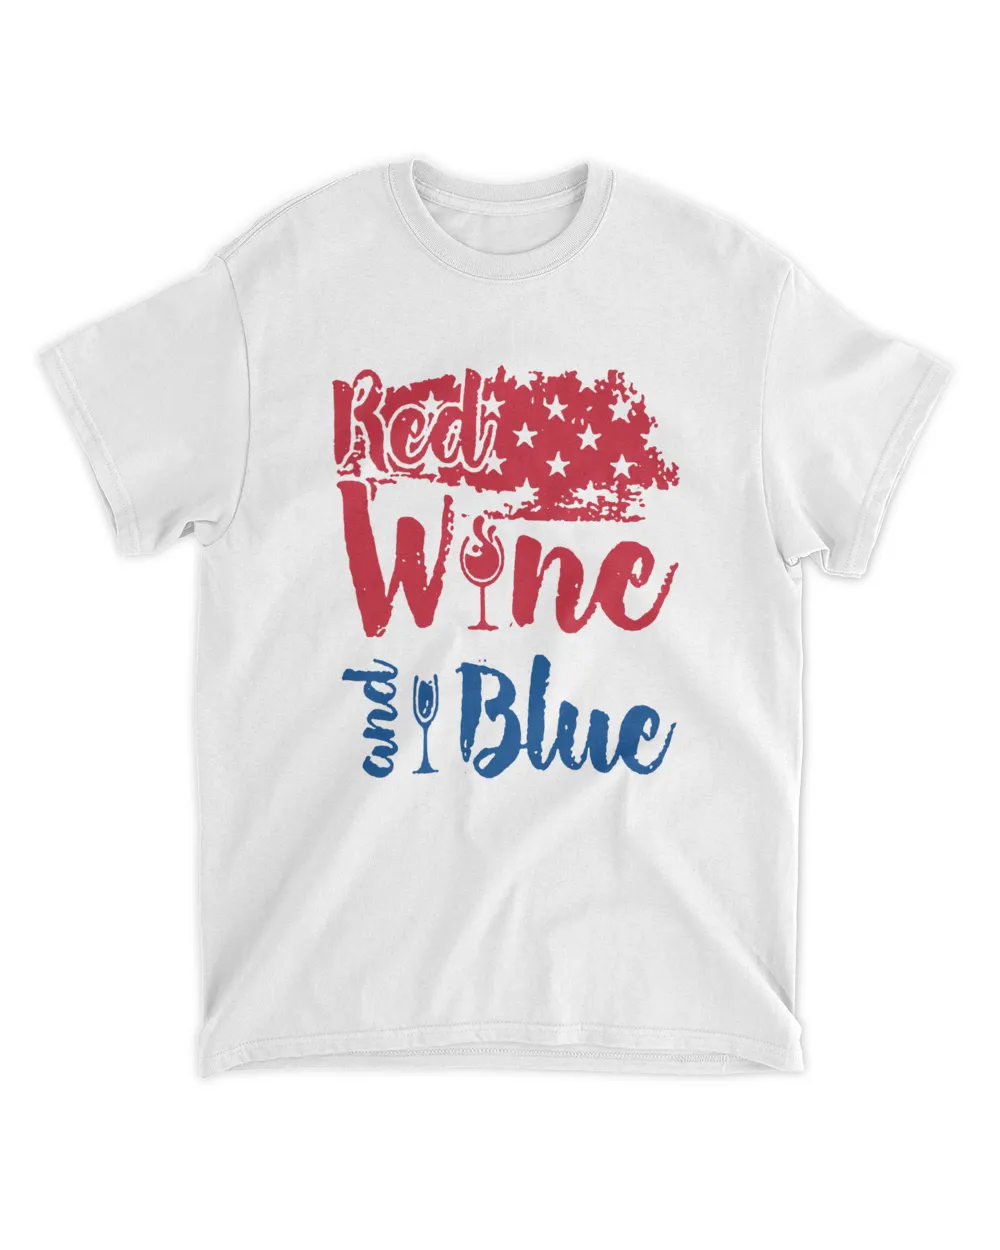 red white and blue shirt